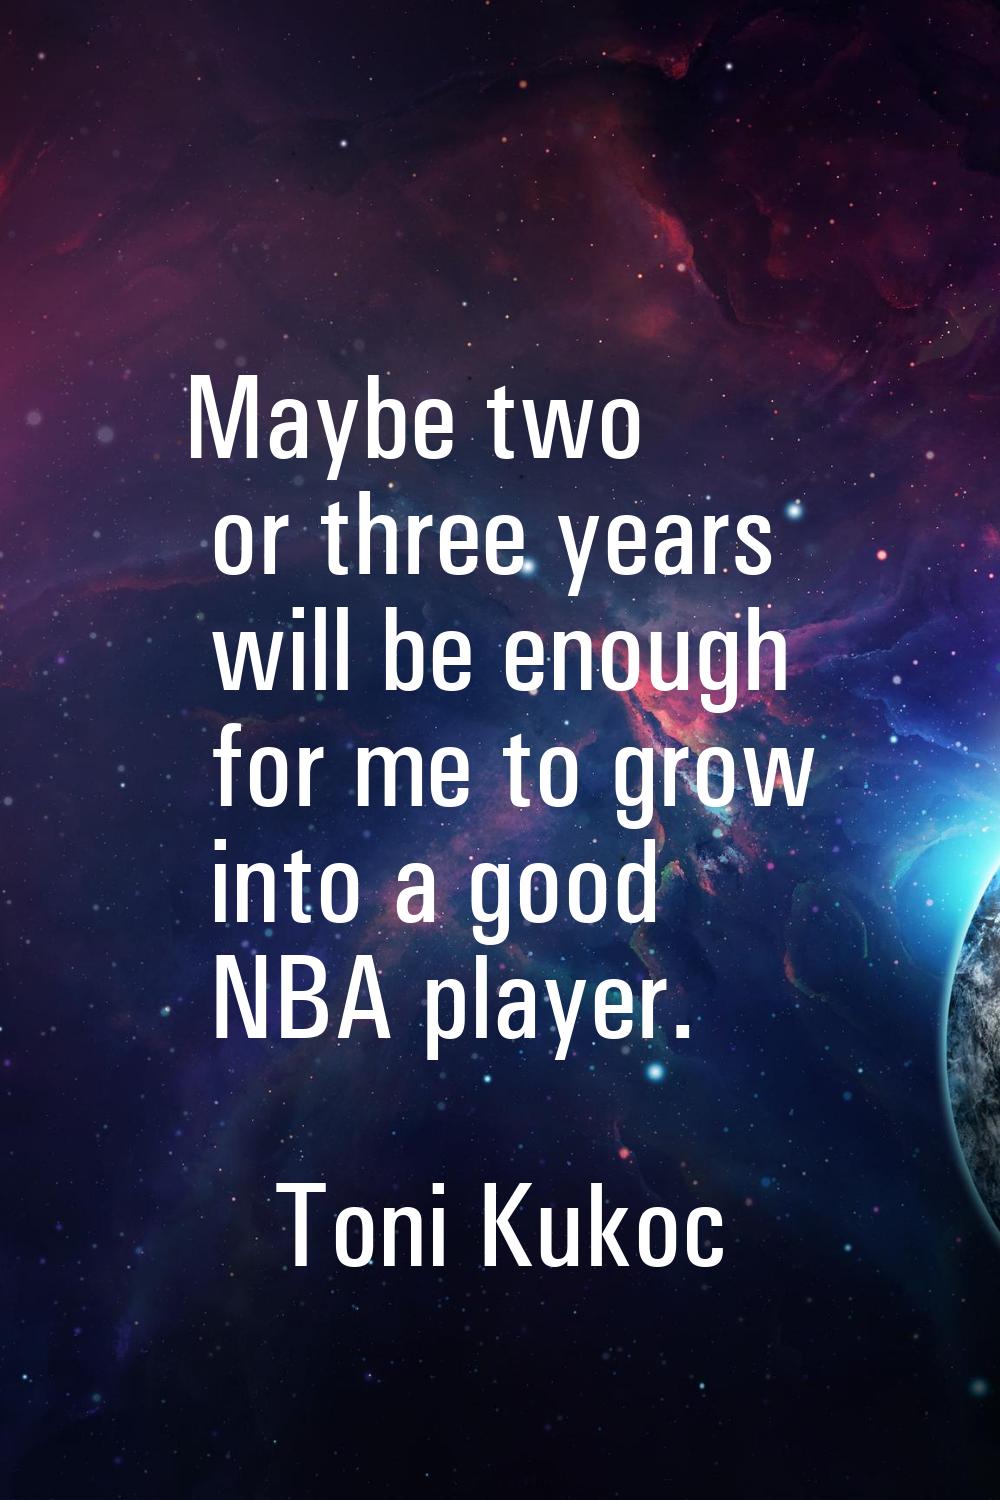 Maybe two or three years will be enough for me to grow into a good NBA player.